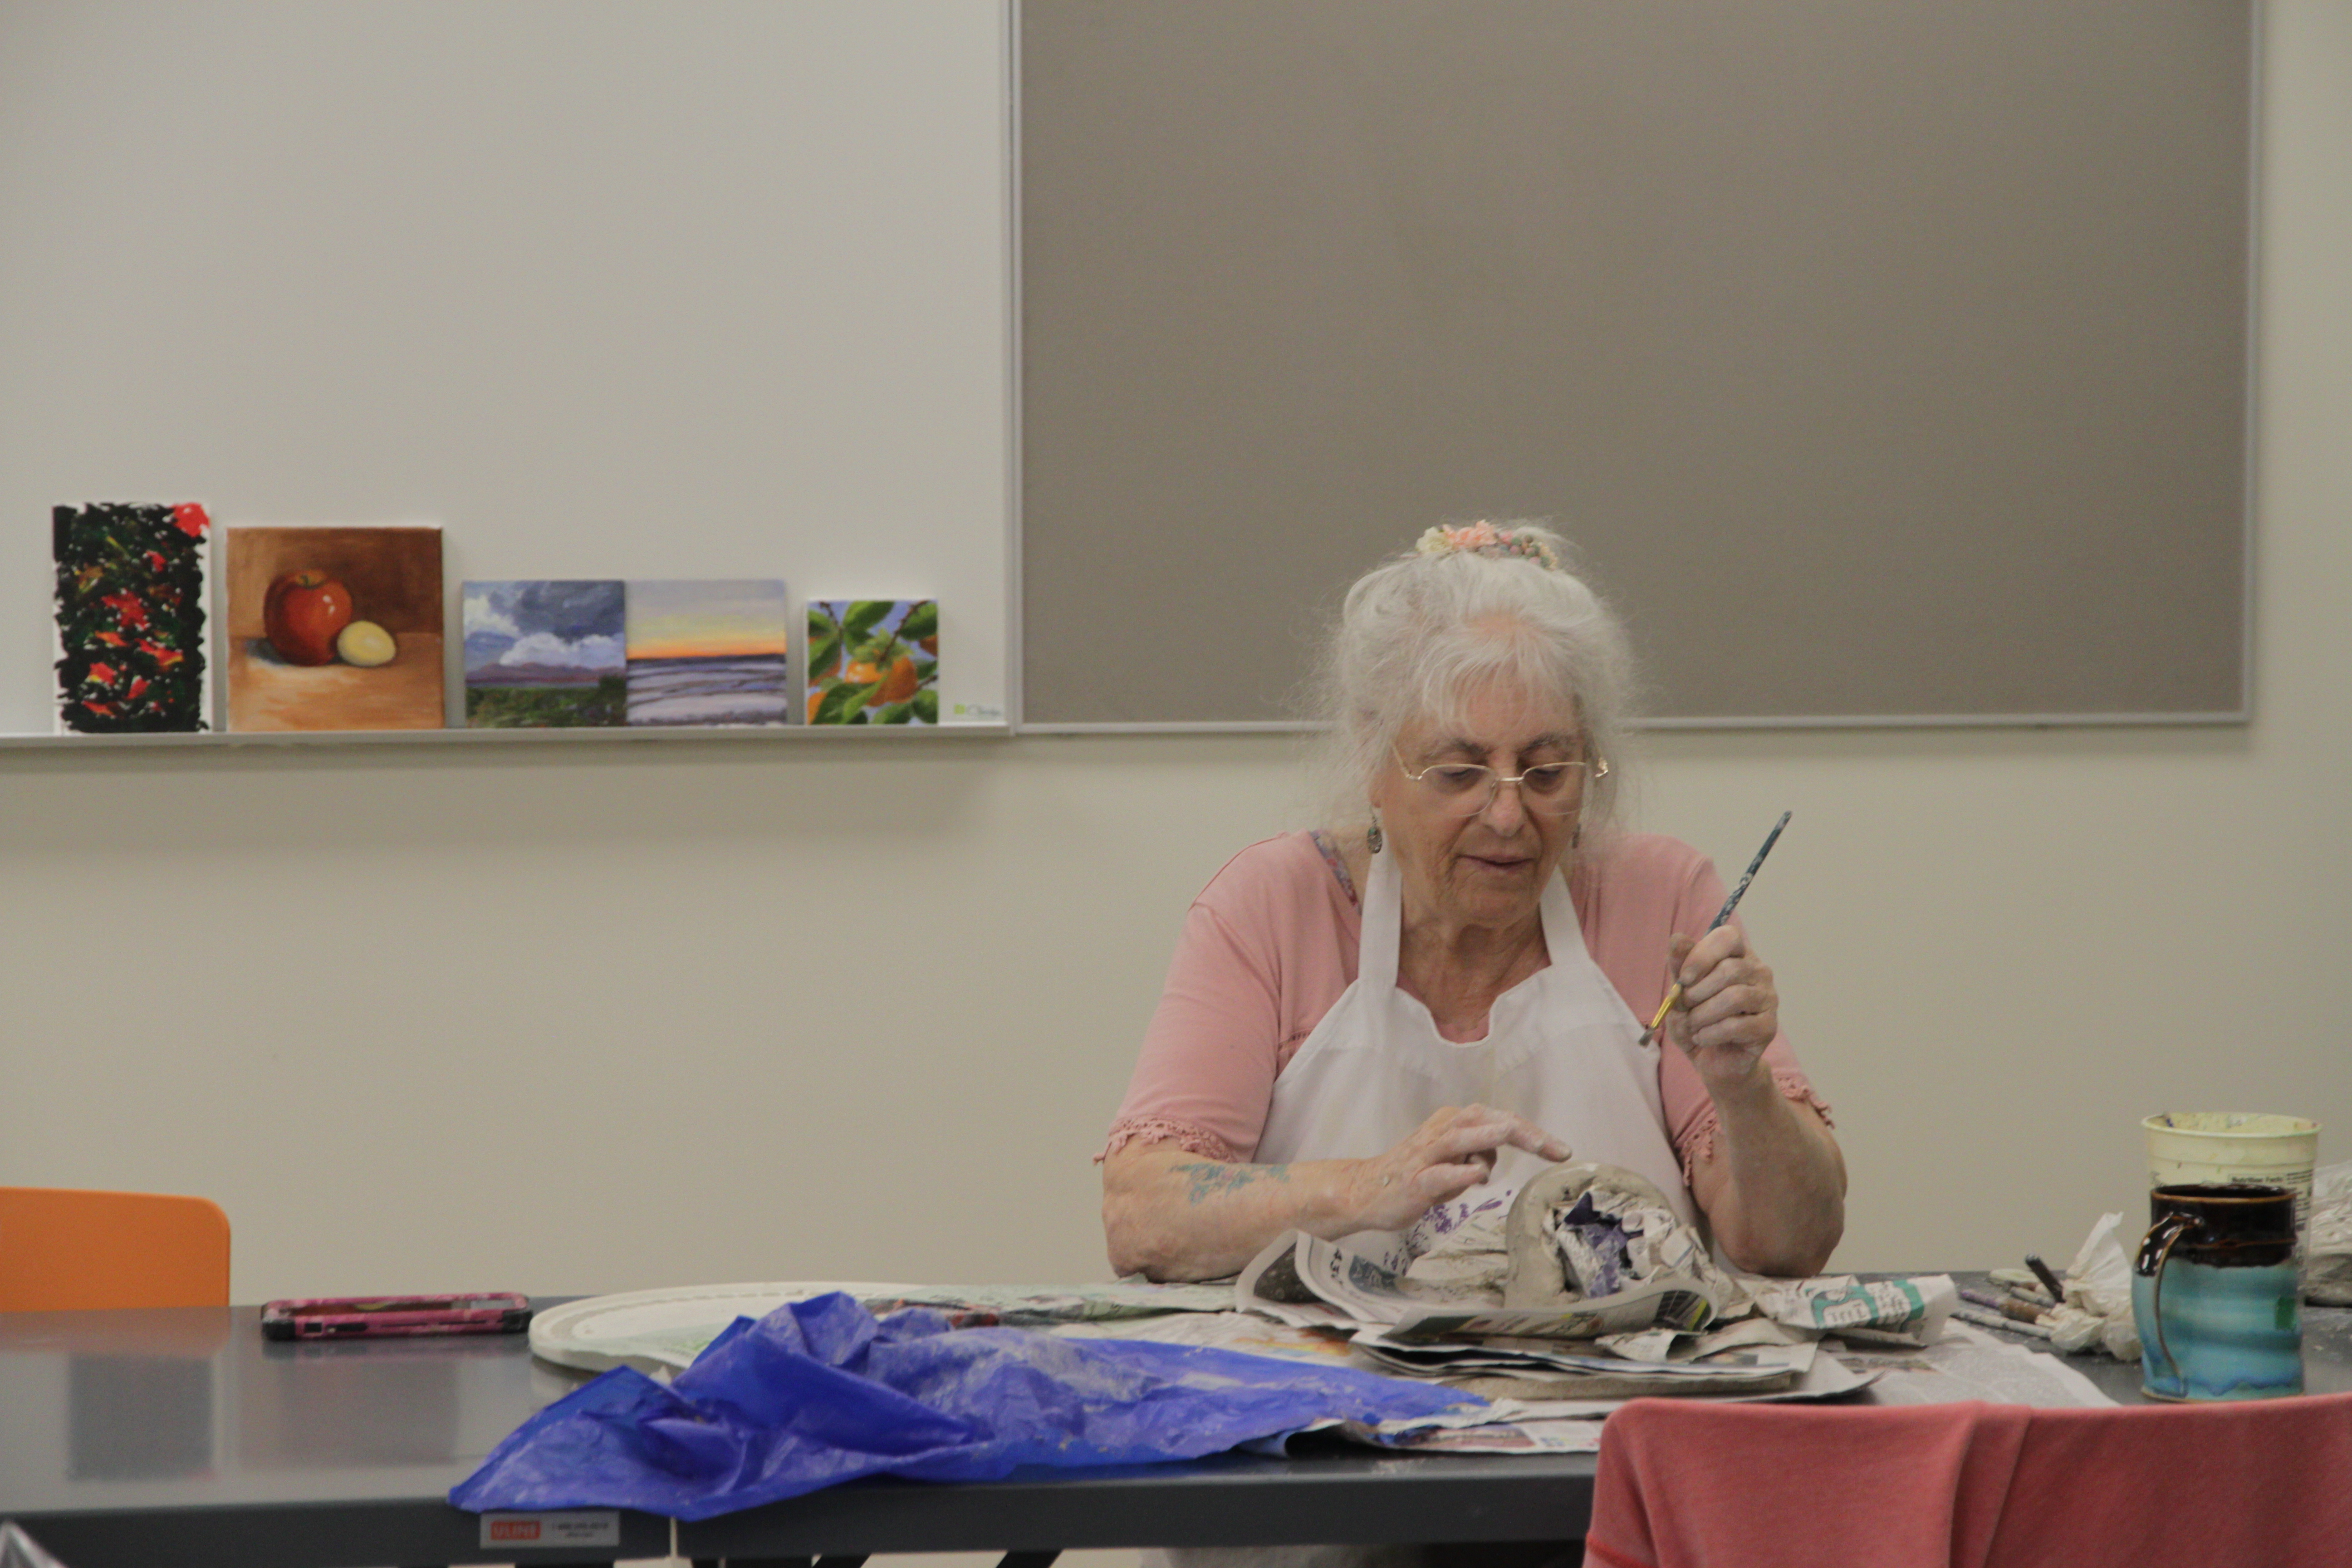 Older adults doing pottery